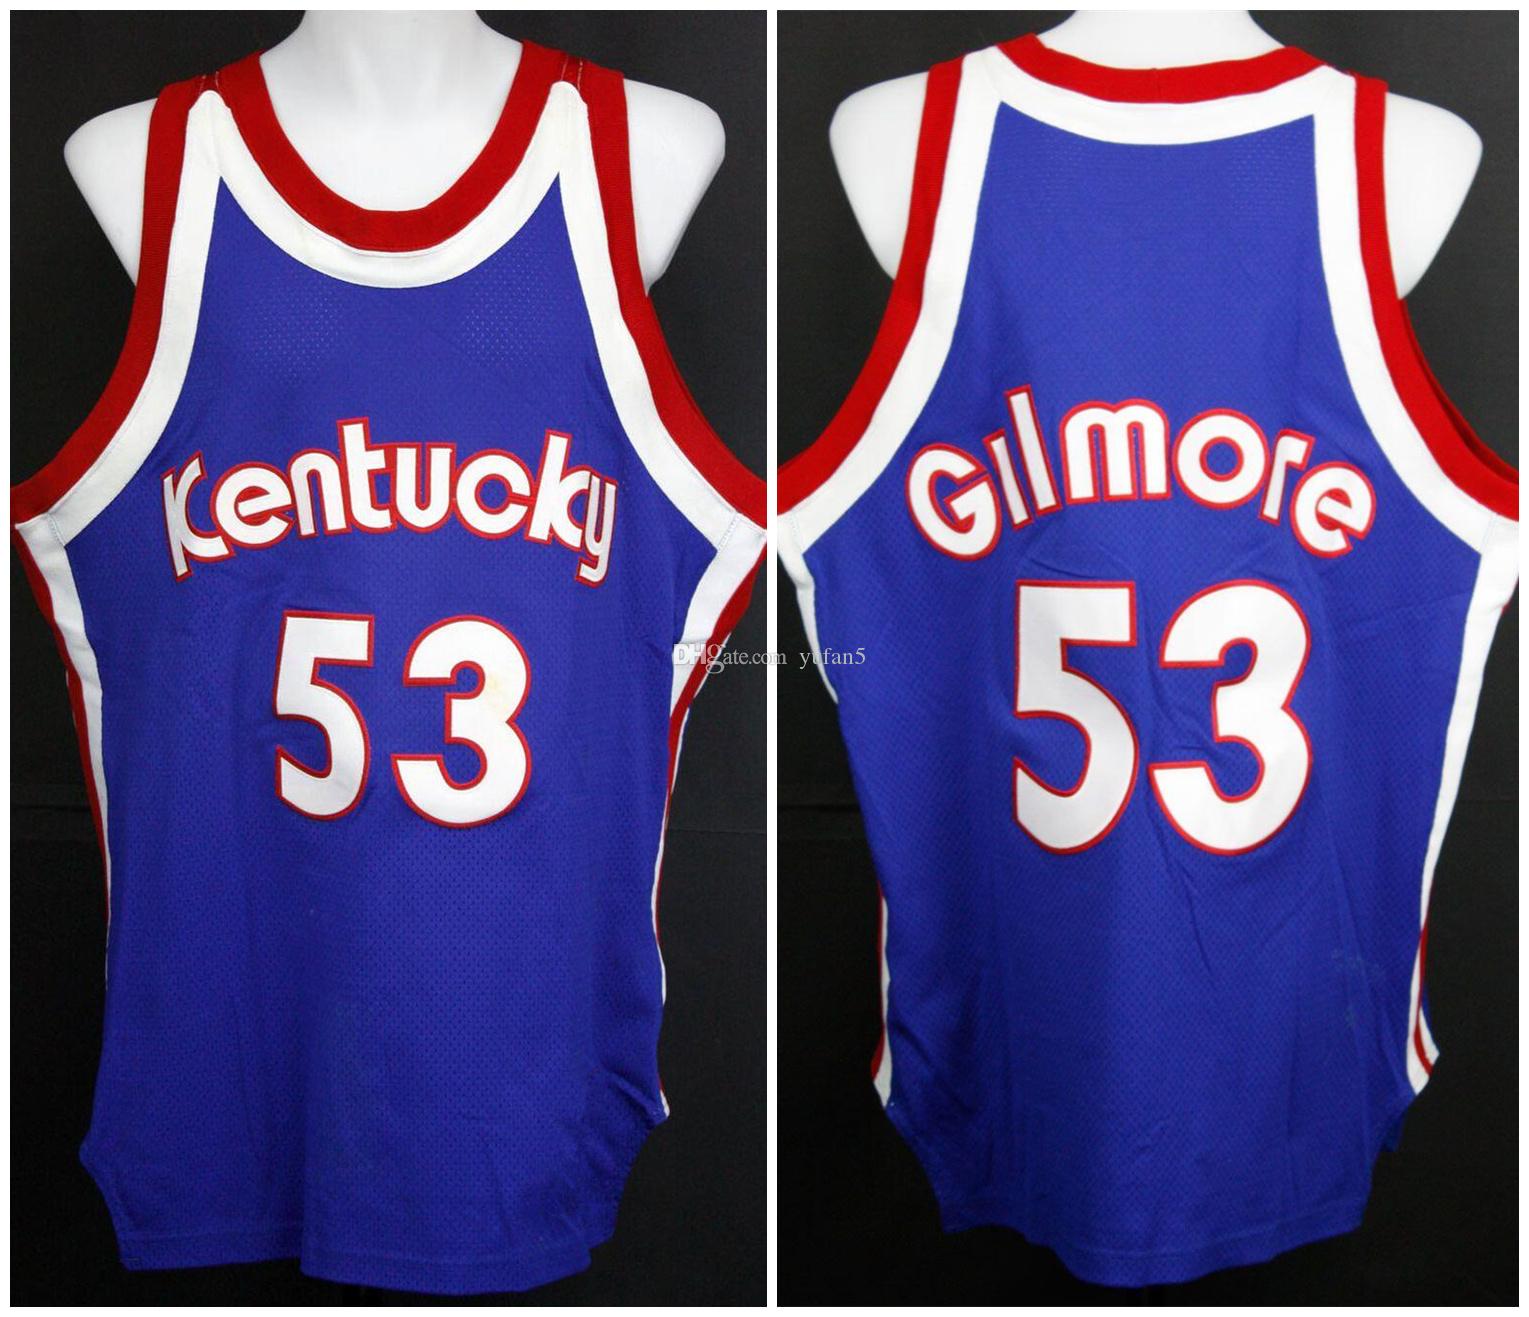 Artis Gilmore #53 Colonels Kentucky RETRO JERSEY 1974-75 레트로 농구 저지 Mens Stitched Custom Number Name Jerseys